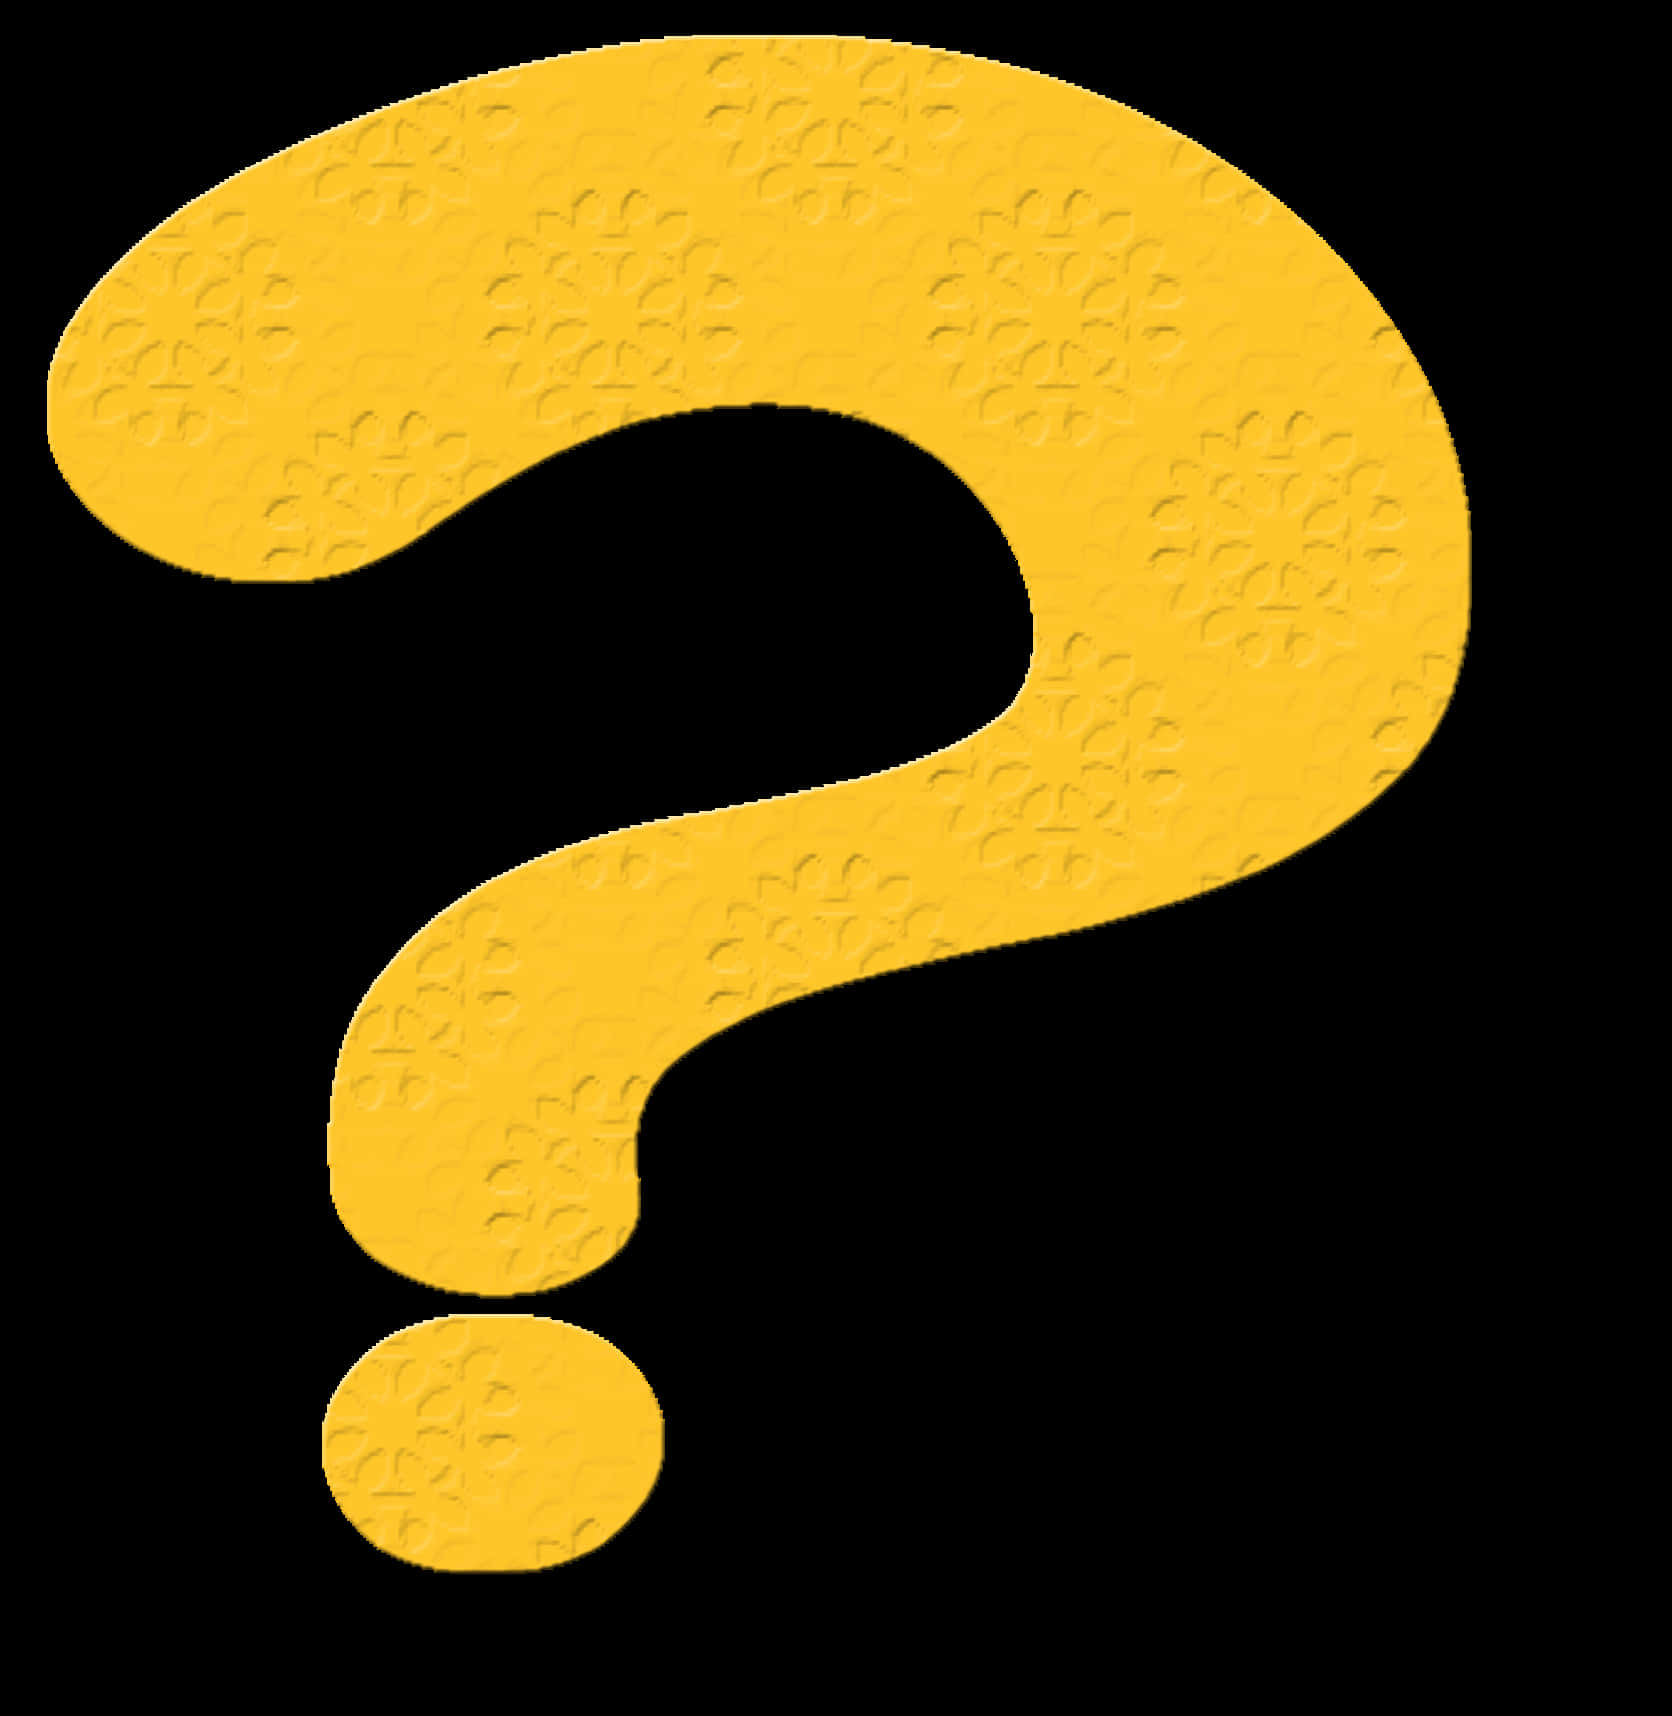 A Yellow Question Mark On A Black Background